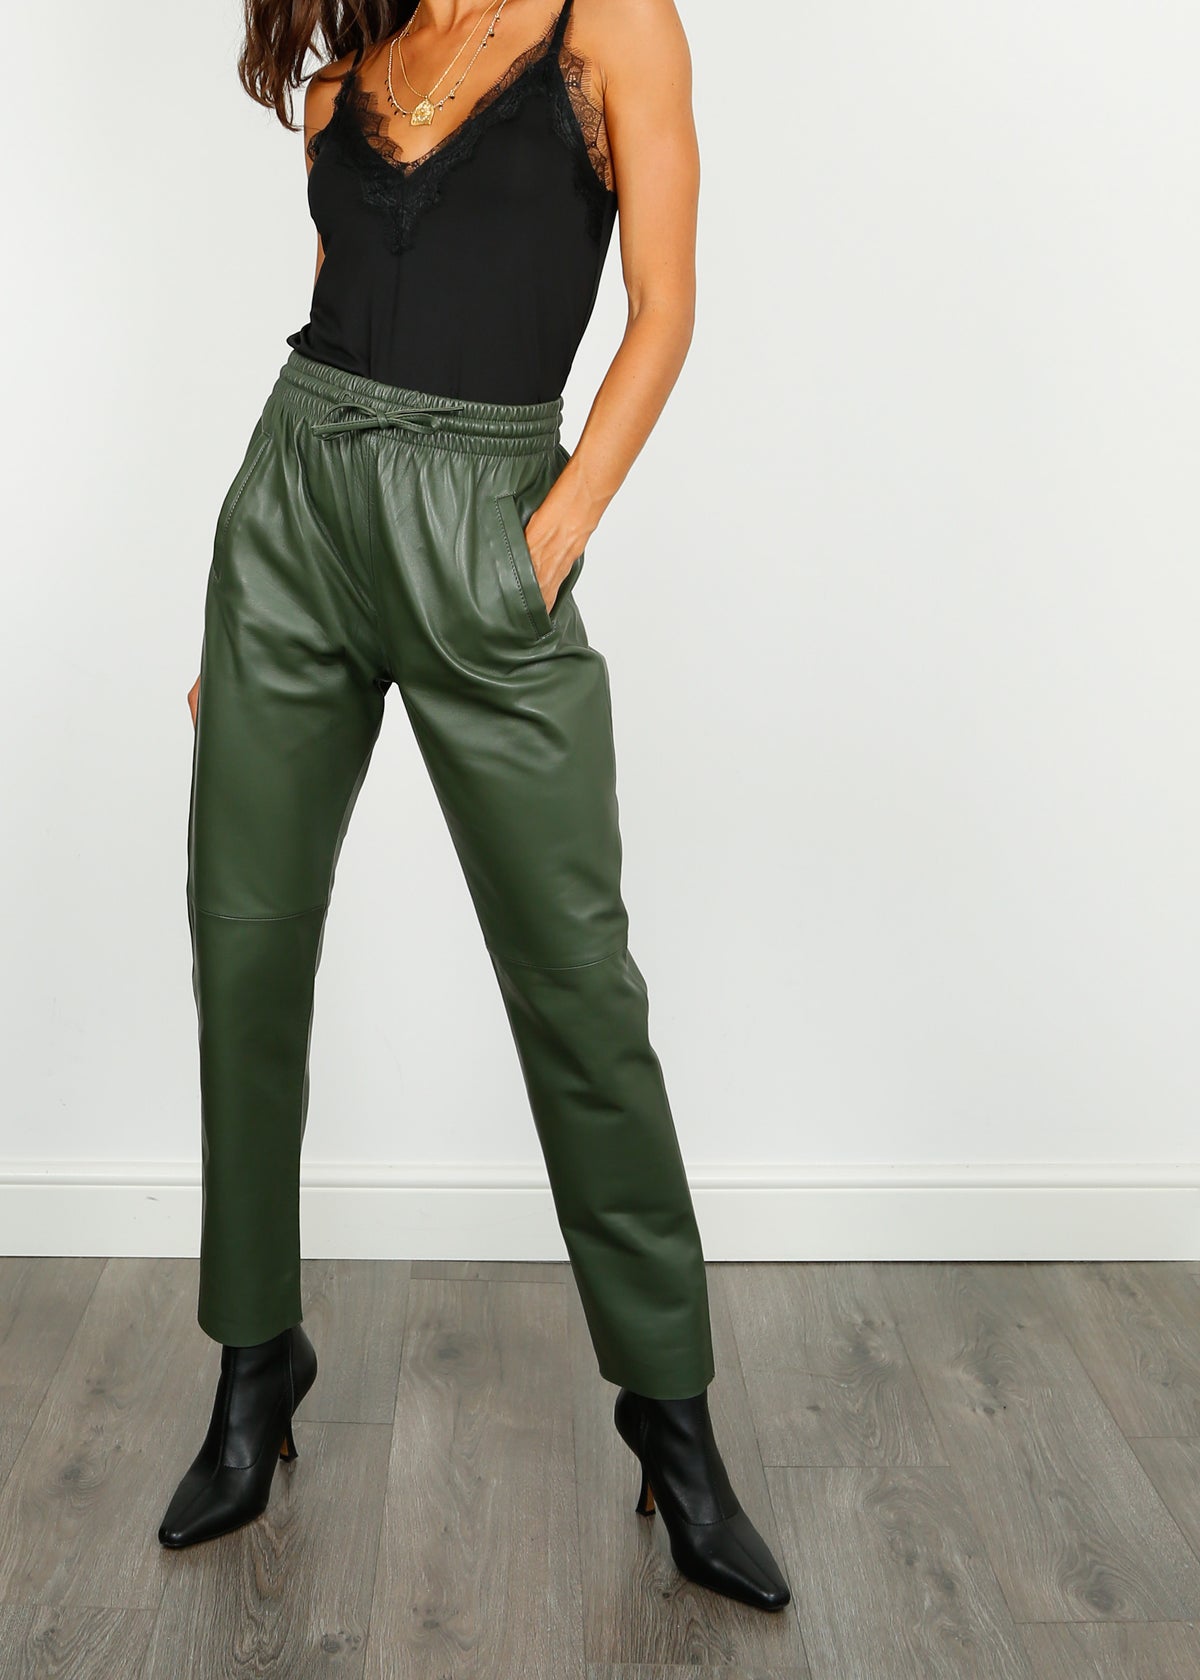 OW Gift Leather Trousers in Khaki